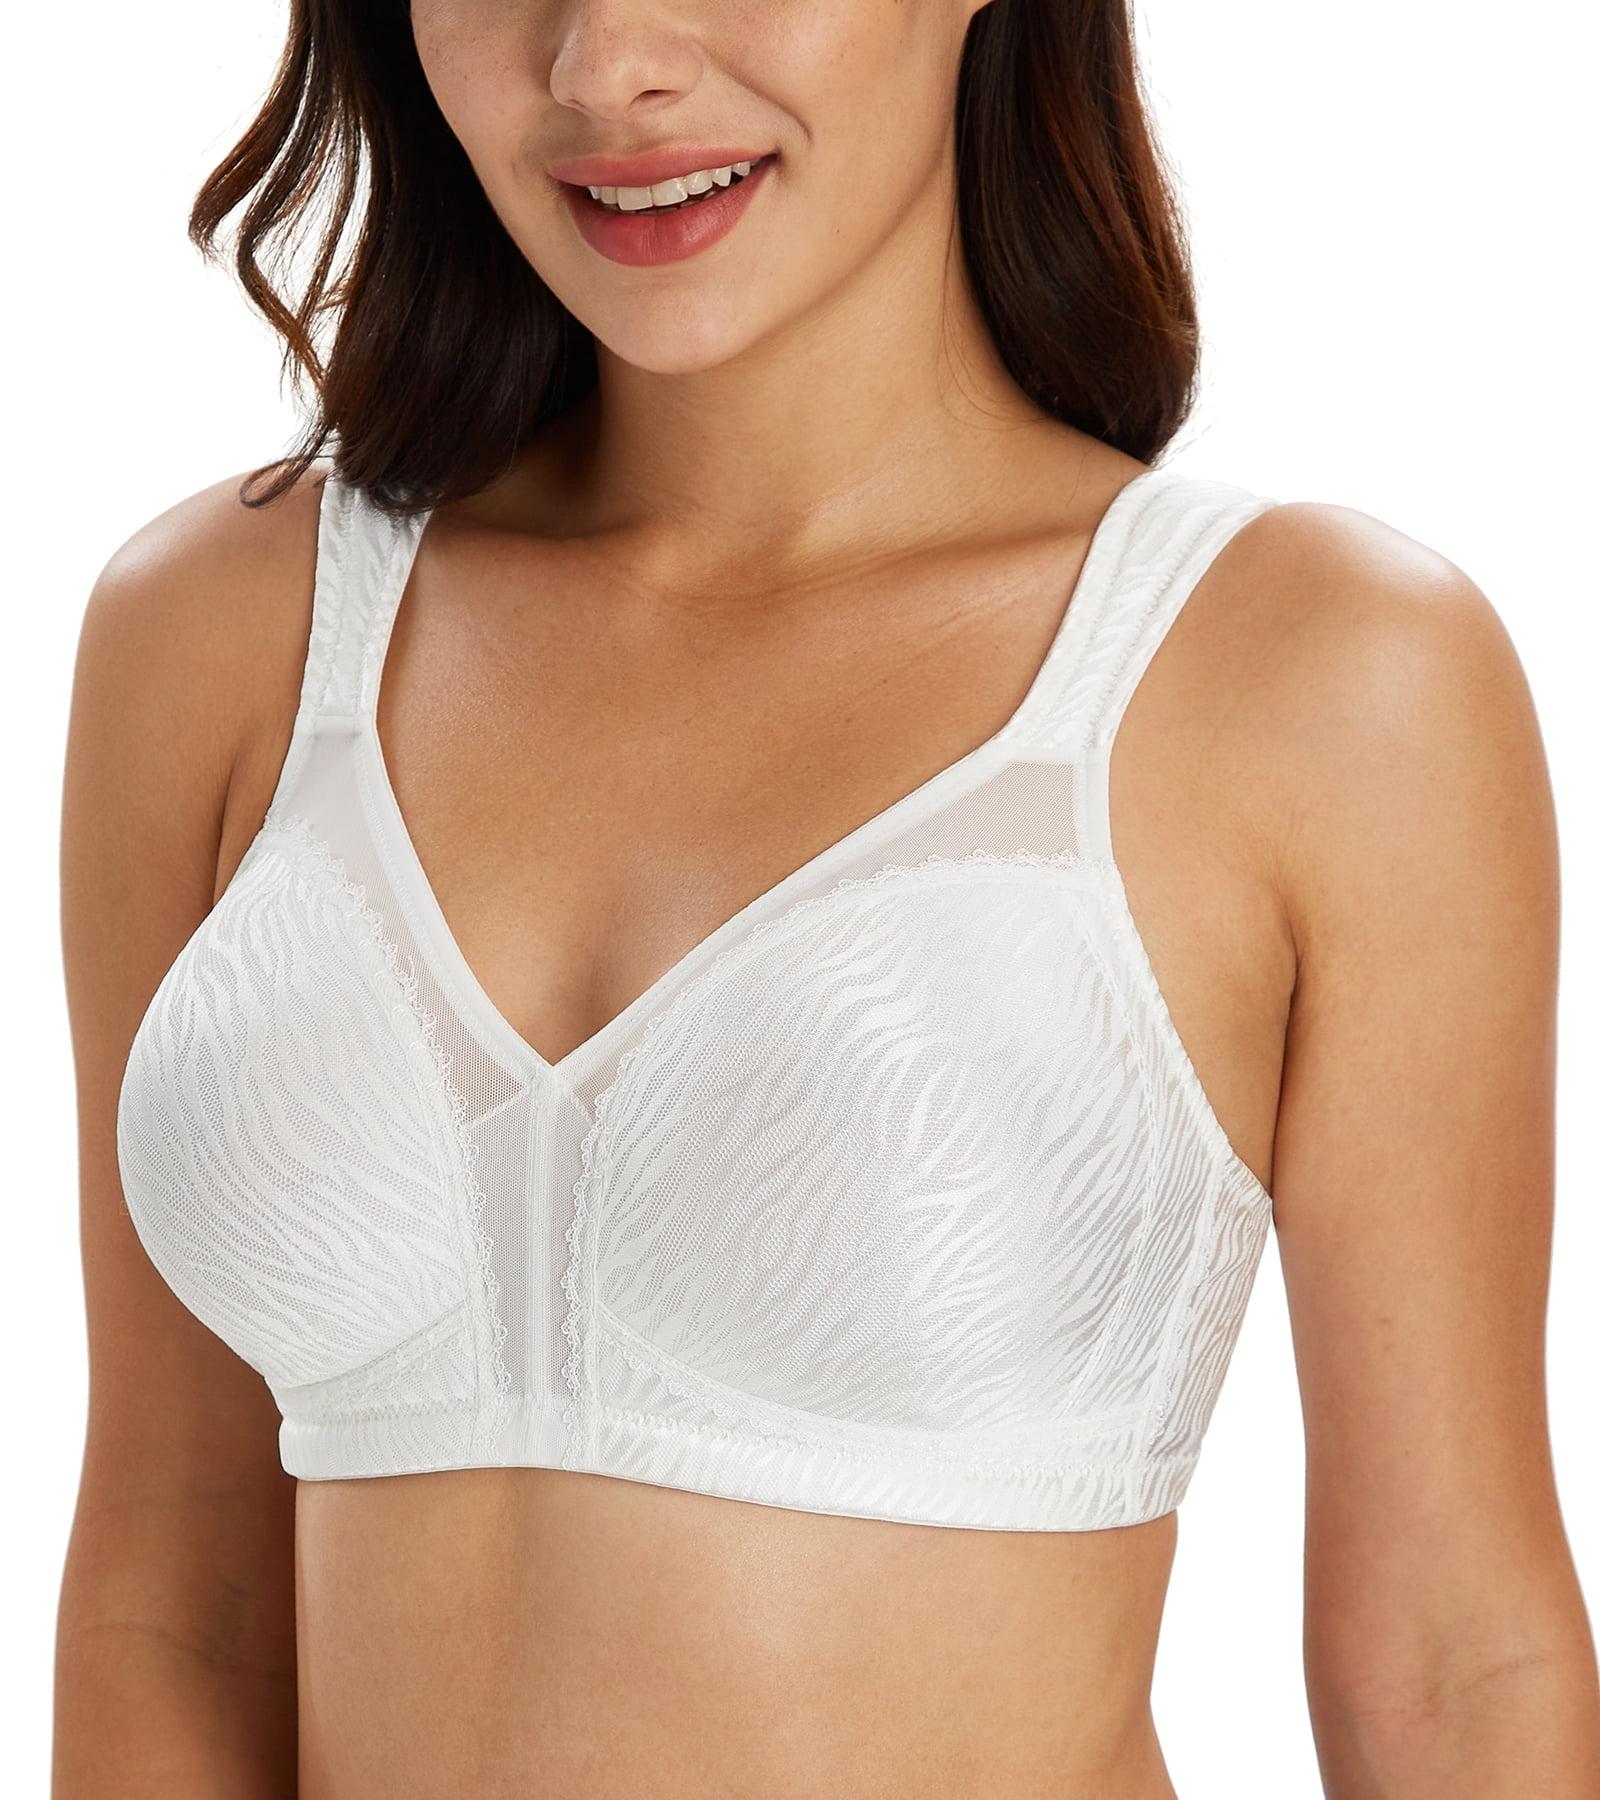 E Cup Minimizer Bra for heavy busted girls ❤️ Comfort inside